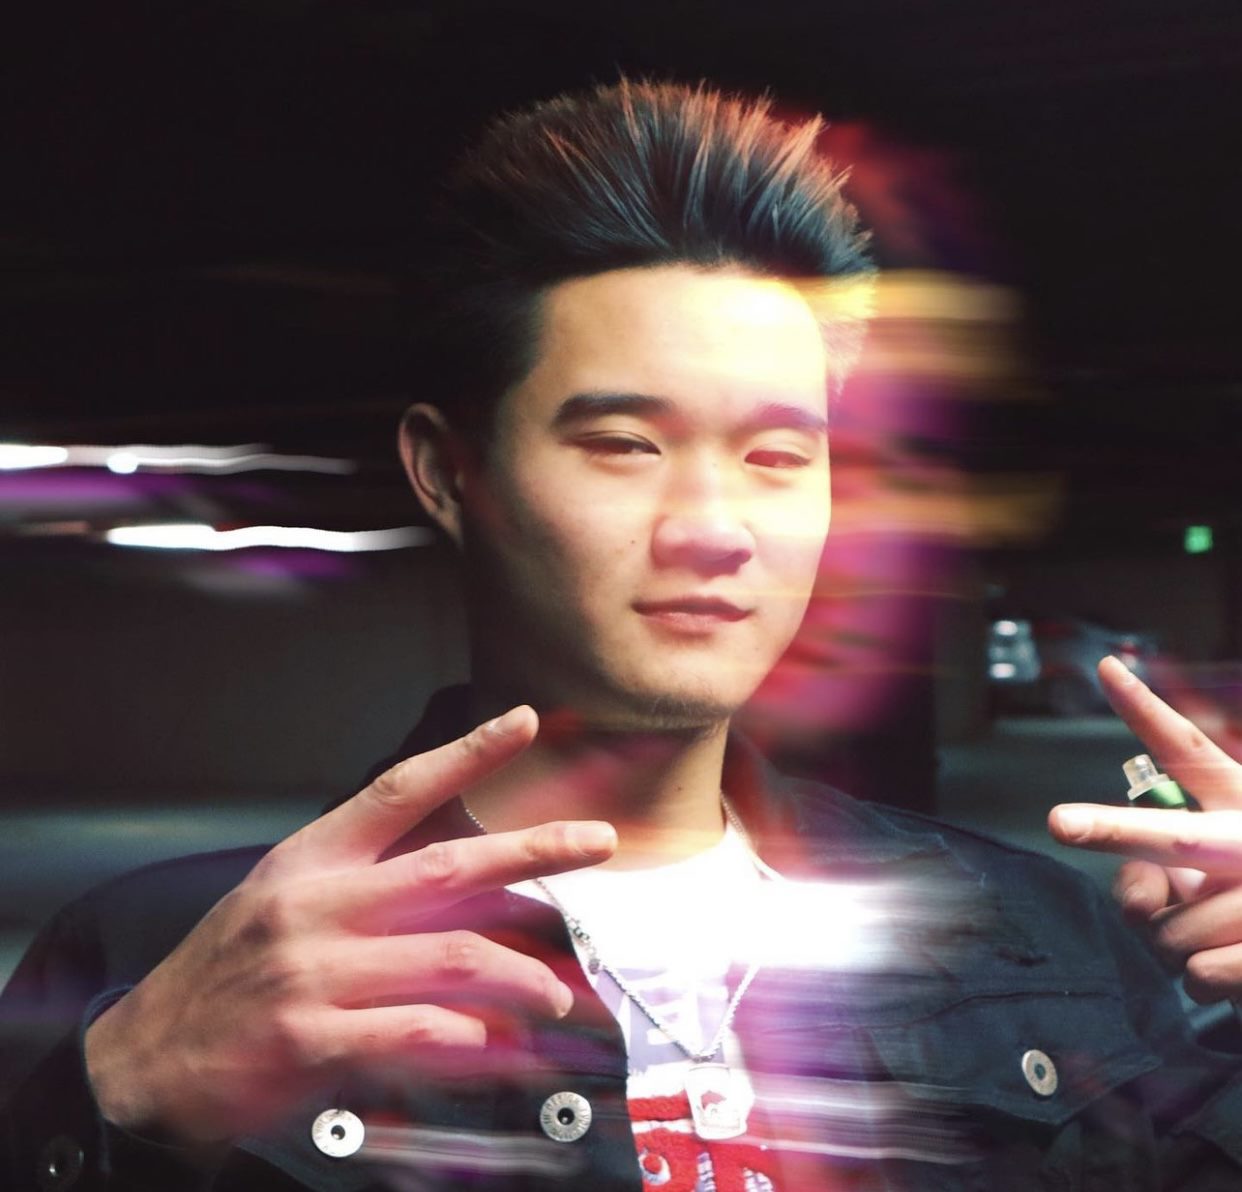 This is a photograph of a man with peace signs and a vape in his hand. The light and color on his face is smeared and the colors are saturated. The smearing makes the image appear to be in motion although the man in the photo is stationary. The man is wearing a black jacket and white shirt. He has black pointy hair as well.